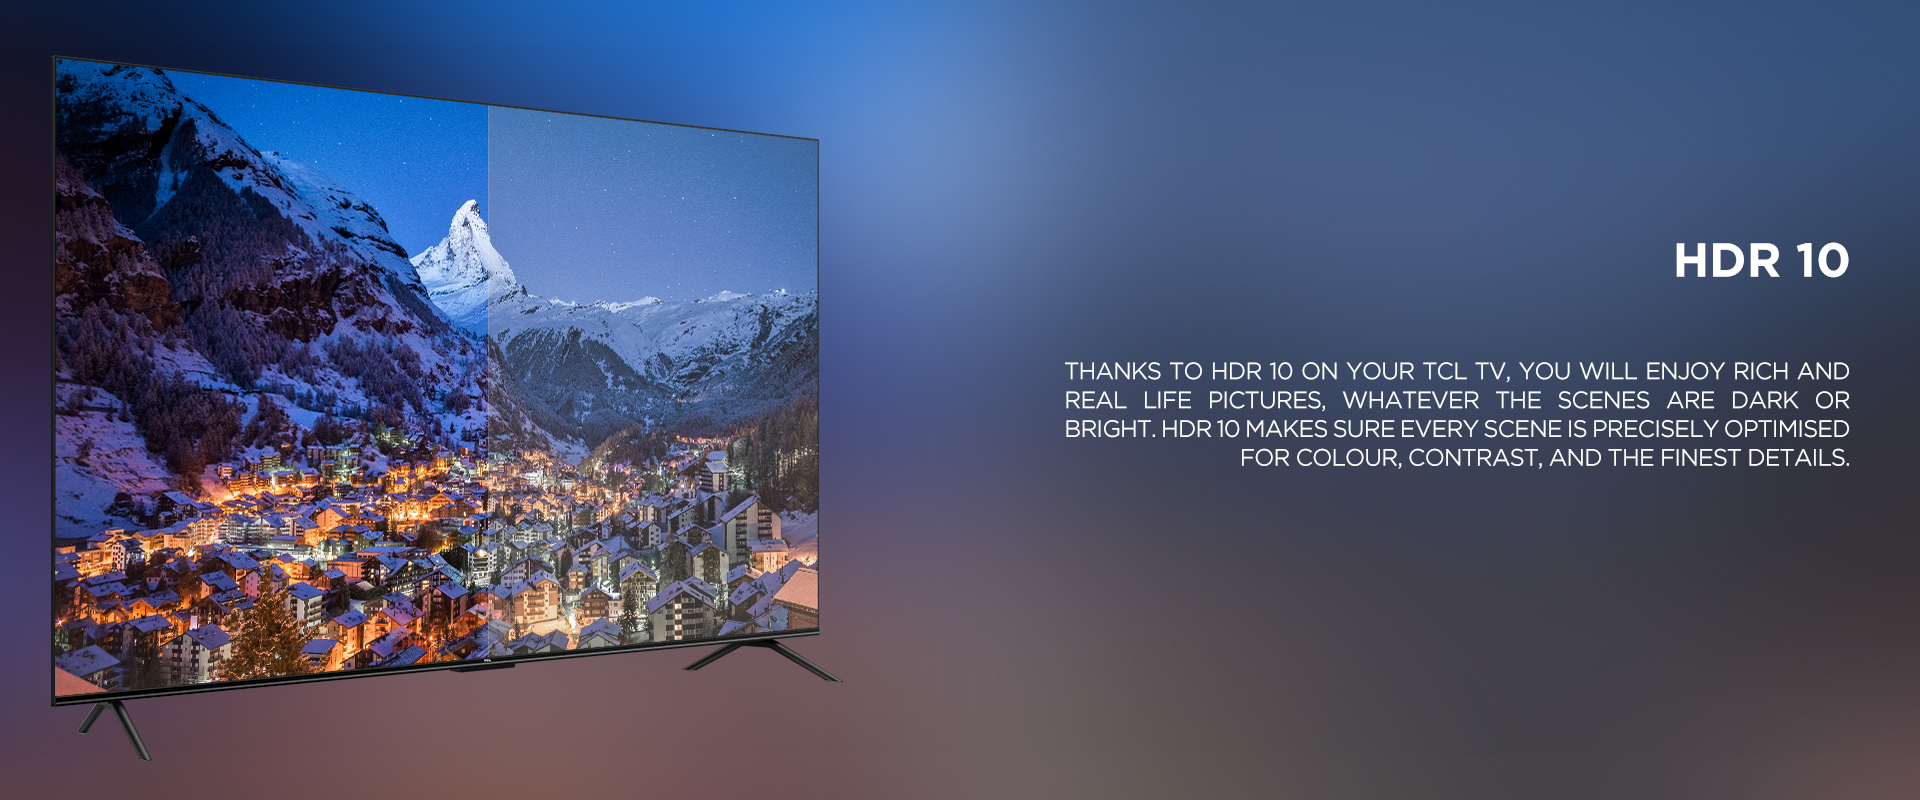 HDR 10 - THANKS TO HDR 10 ON YOUR TCL TV, YOU WILL ENJOY RICH AND REAL LIFE PICTURES, WHATEVER THE SCENES ARE DARK OR BRIGHT. HDR 10 MAKES SURE EVERY SCENE IS PRECISELY OPTIMISED FOR COLOUR, CONTRAST, AND THE FINEST DETAILS.